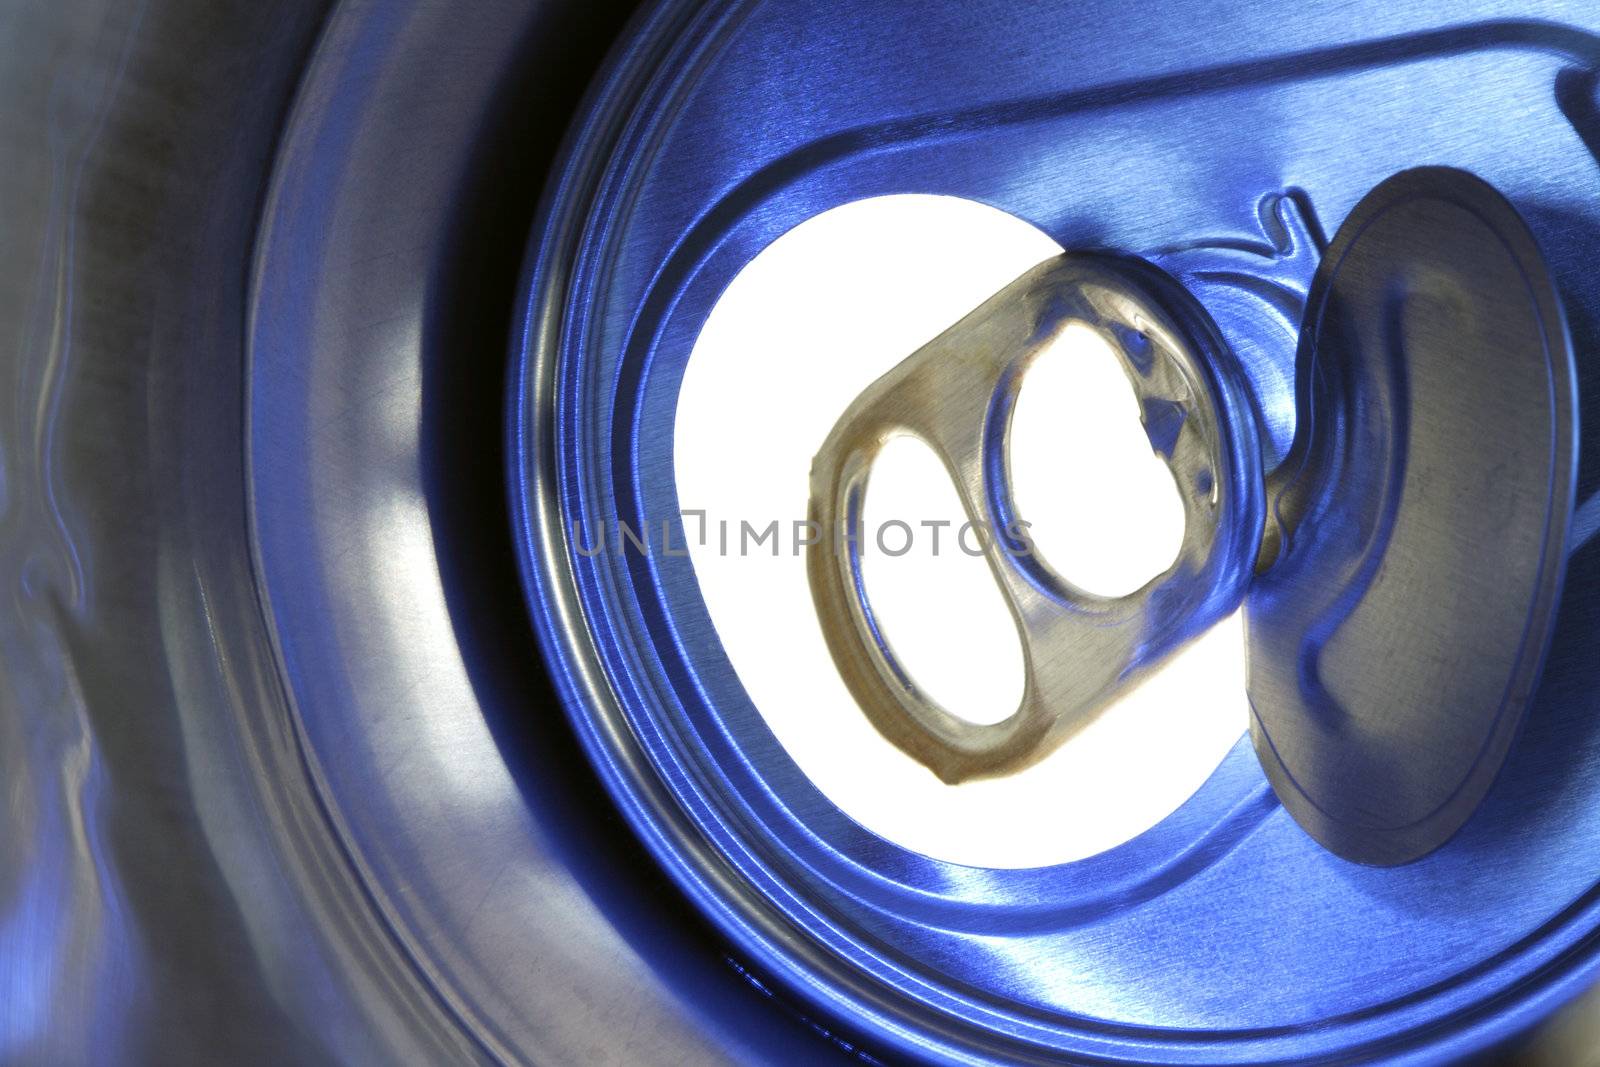 Image made inside empty beer can against light. Abstract bacground. Closeup